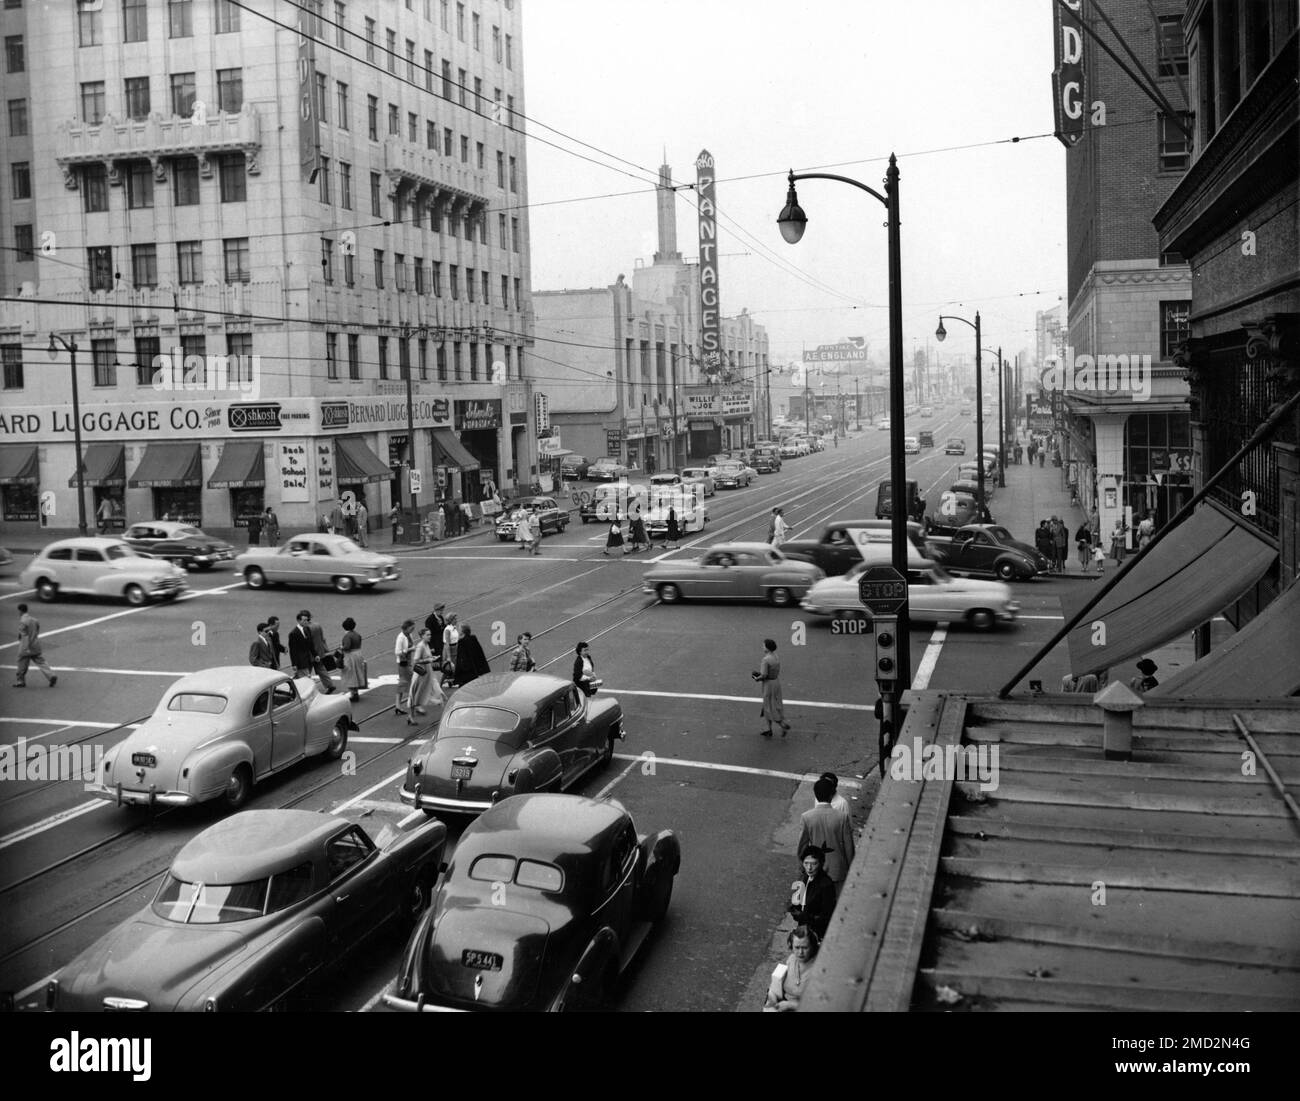 Intersection of HOLLYWOOD BOULEVARD and VINE STREET in 1952 with RKO PANTAGES movie theatre and SCHWAB'S PHARMACY visible Stock Photo